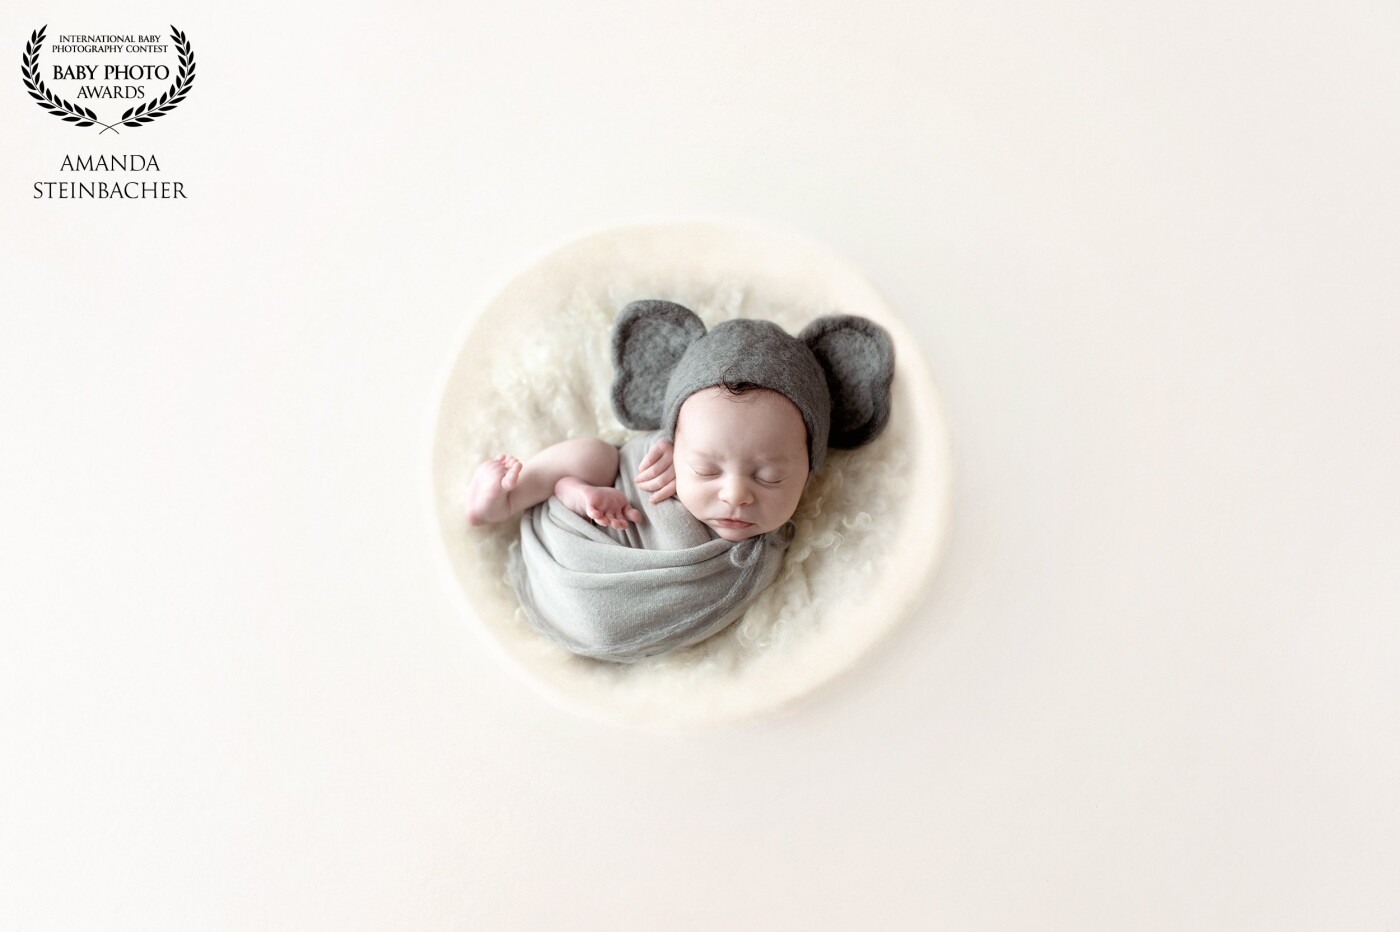 This little babe's nursery was decorated with all sorts of animals - but mostly Elephants.  What better way to add to the nursery decorations than to have a beautiful portrait of the newborn in a hand-felted elephant bonnet.